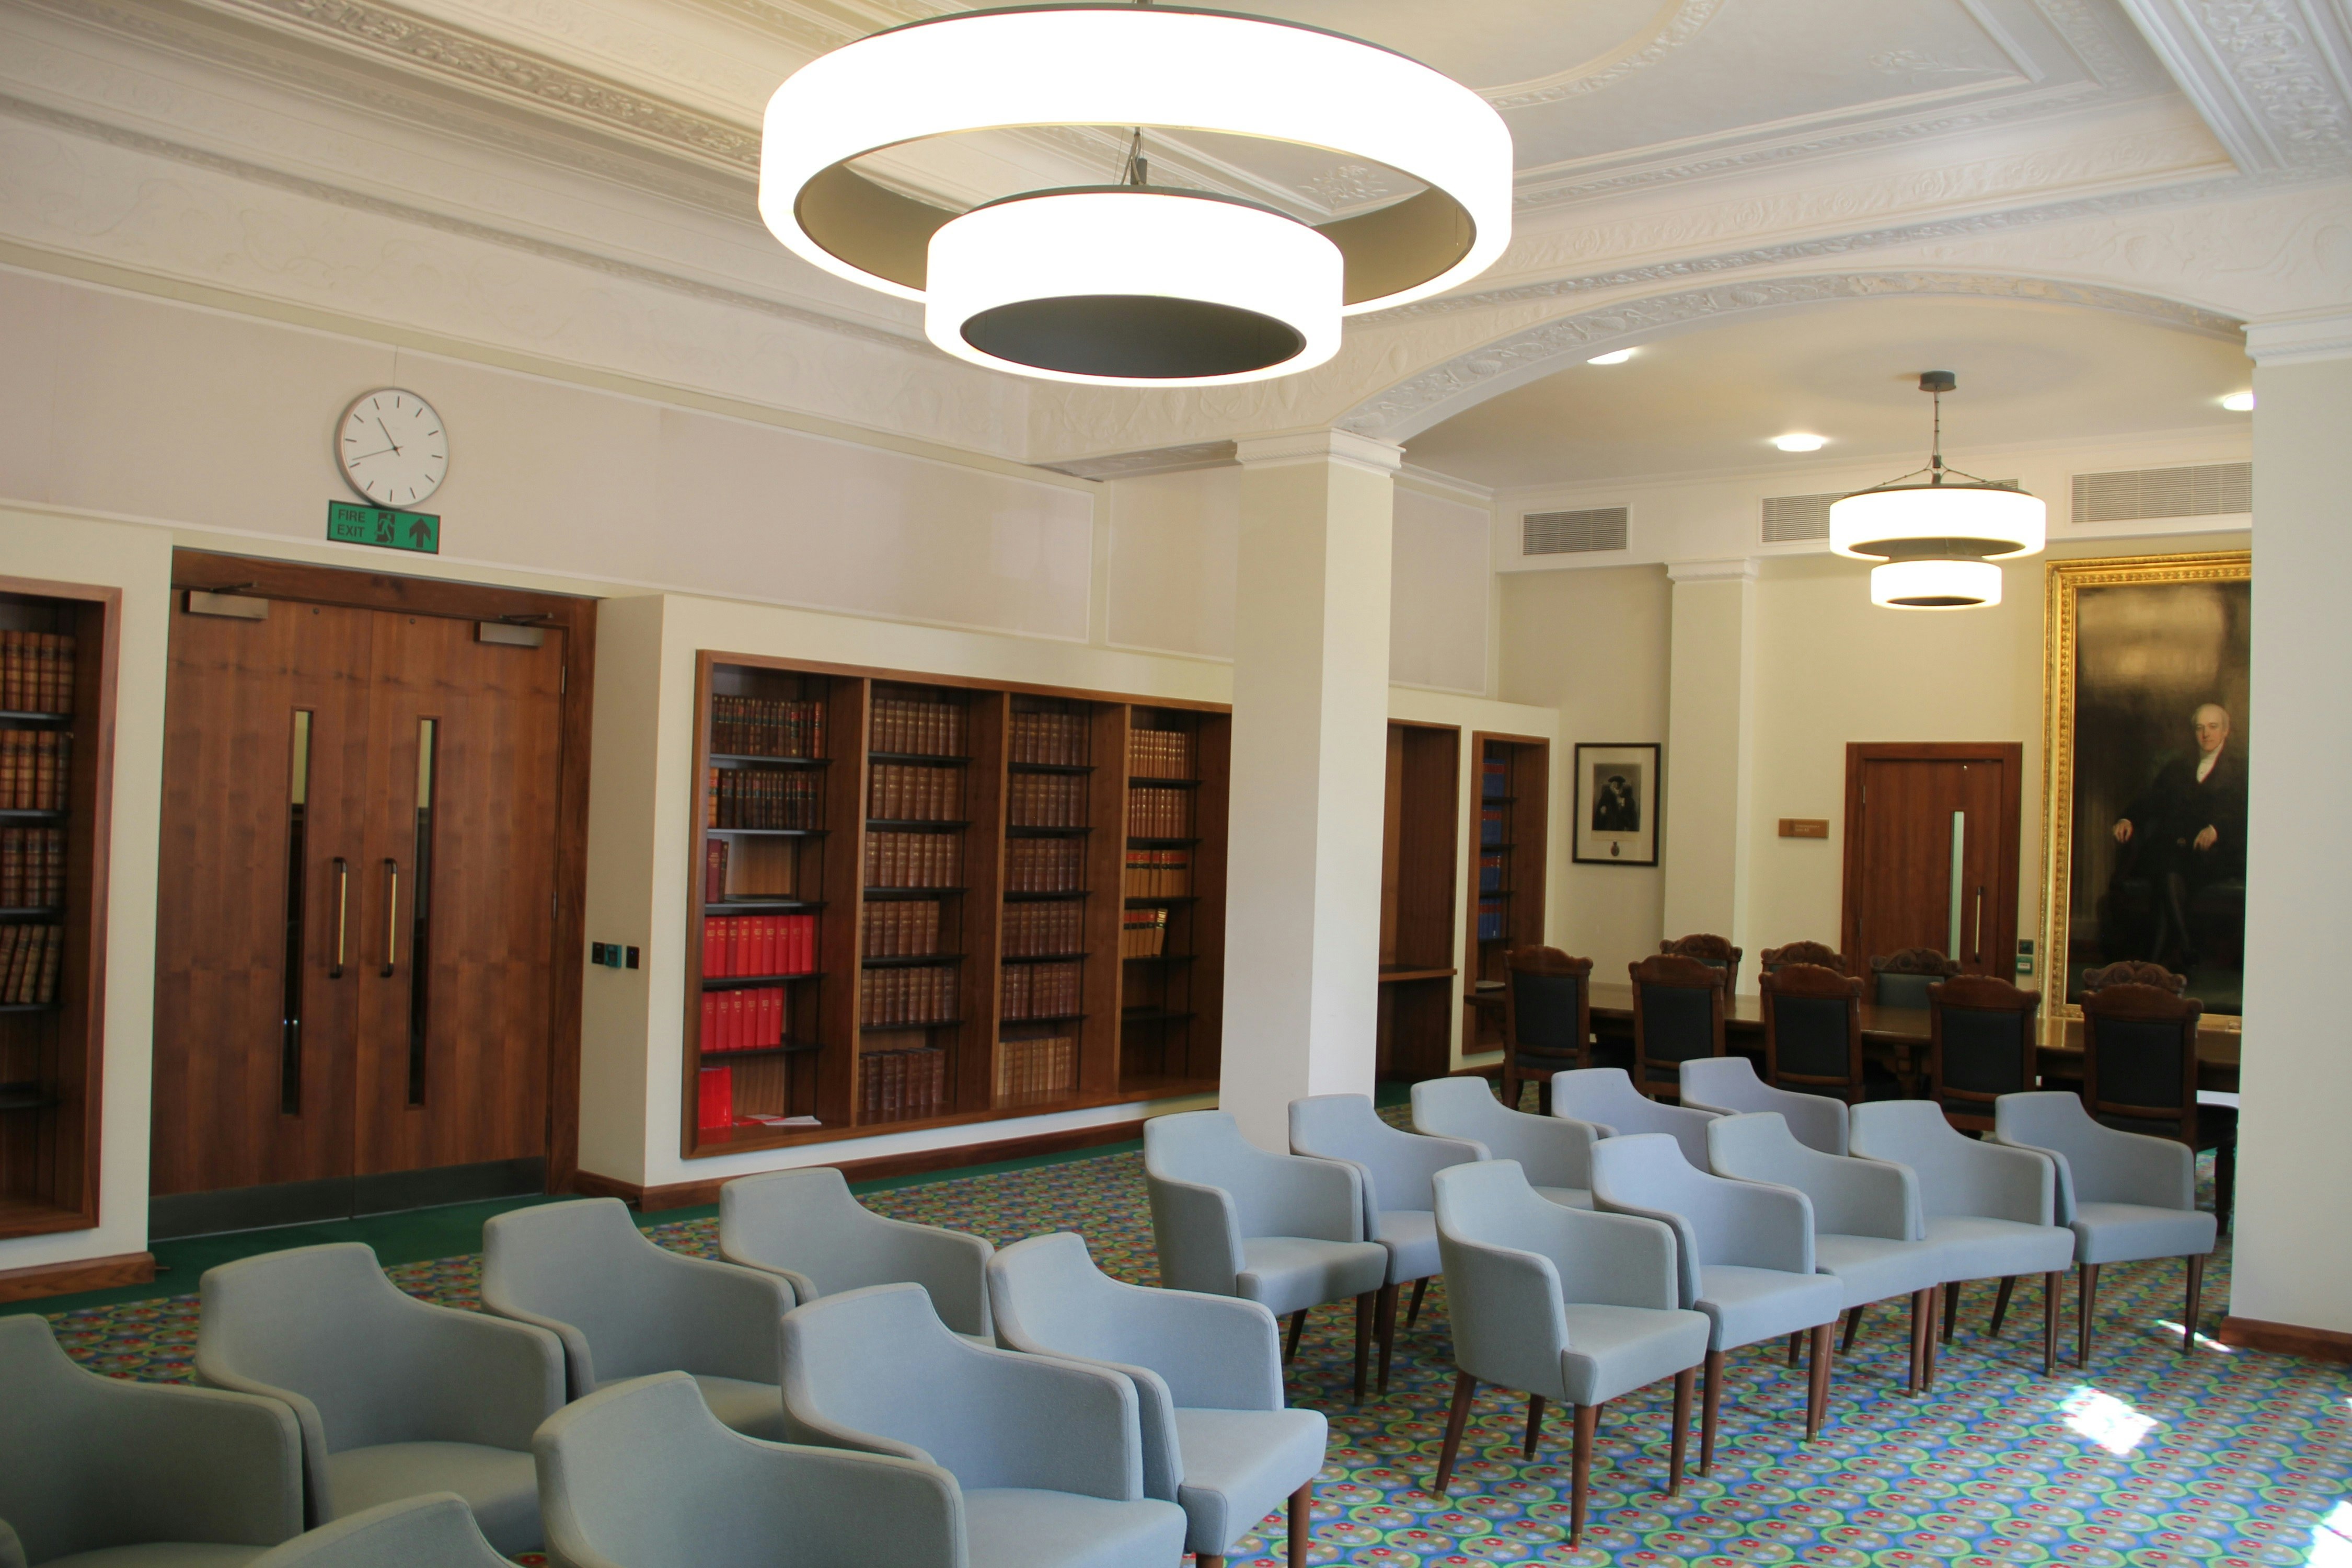 Away Day Venues in West London - The Supreme Court of the United Kingdom